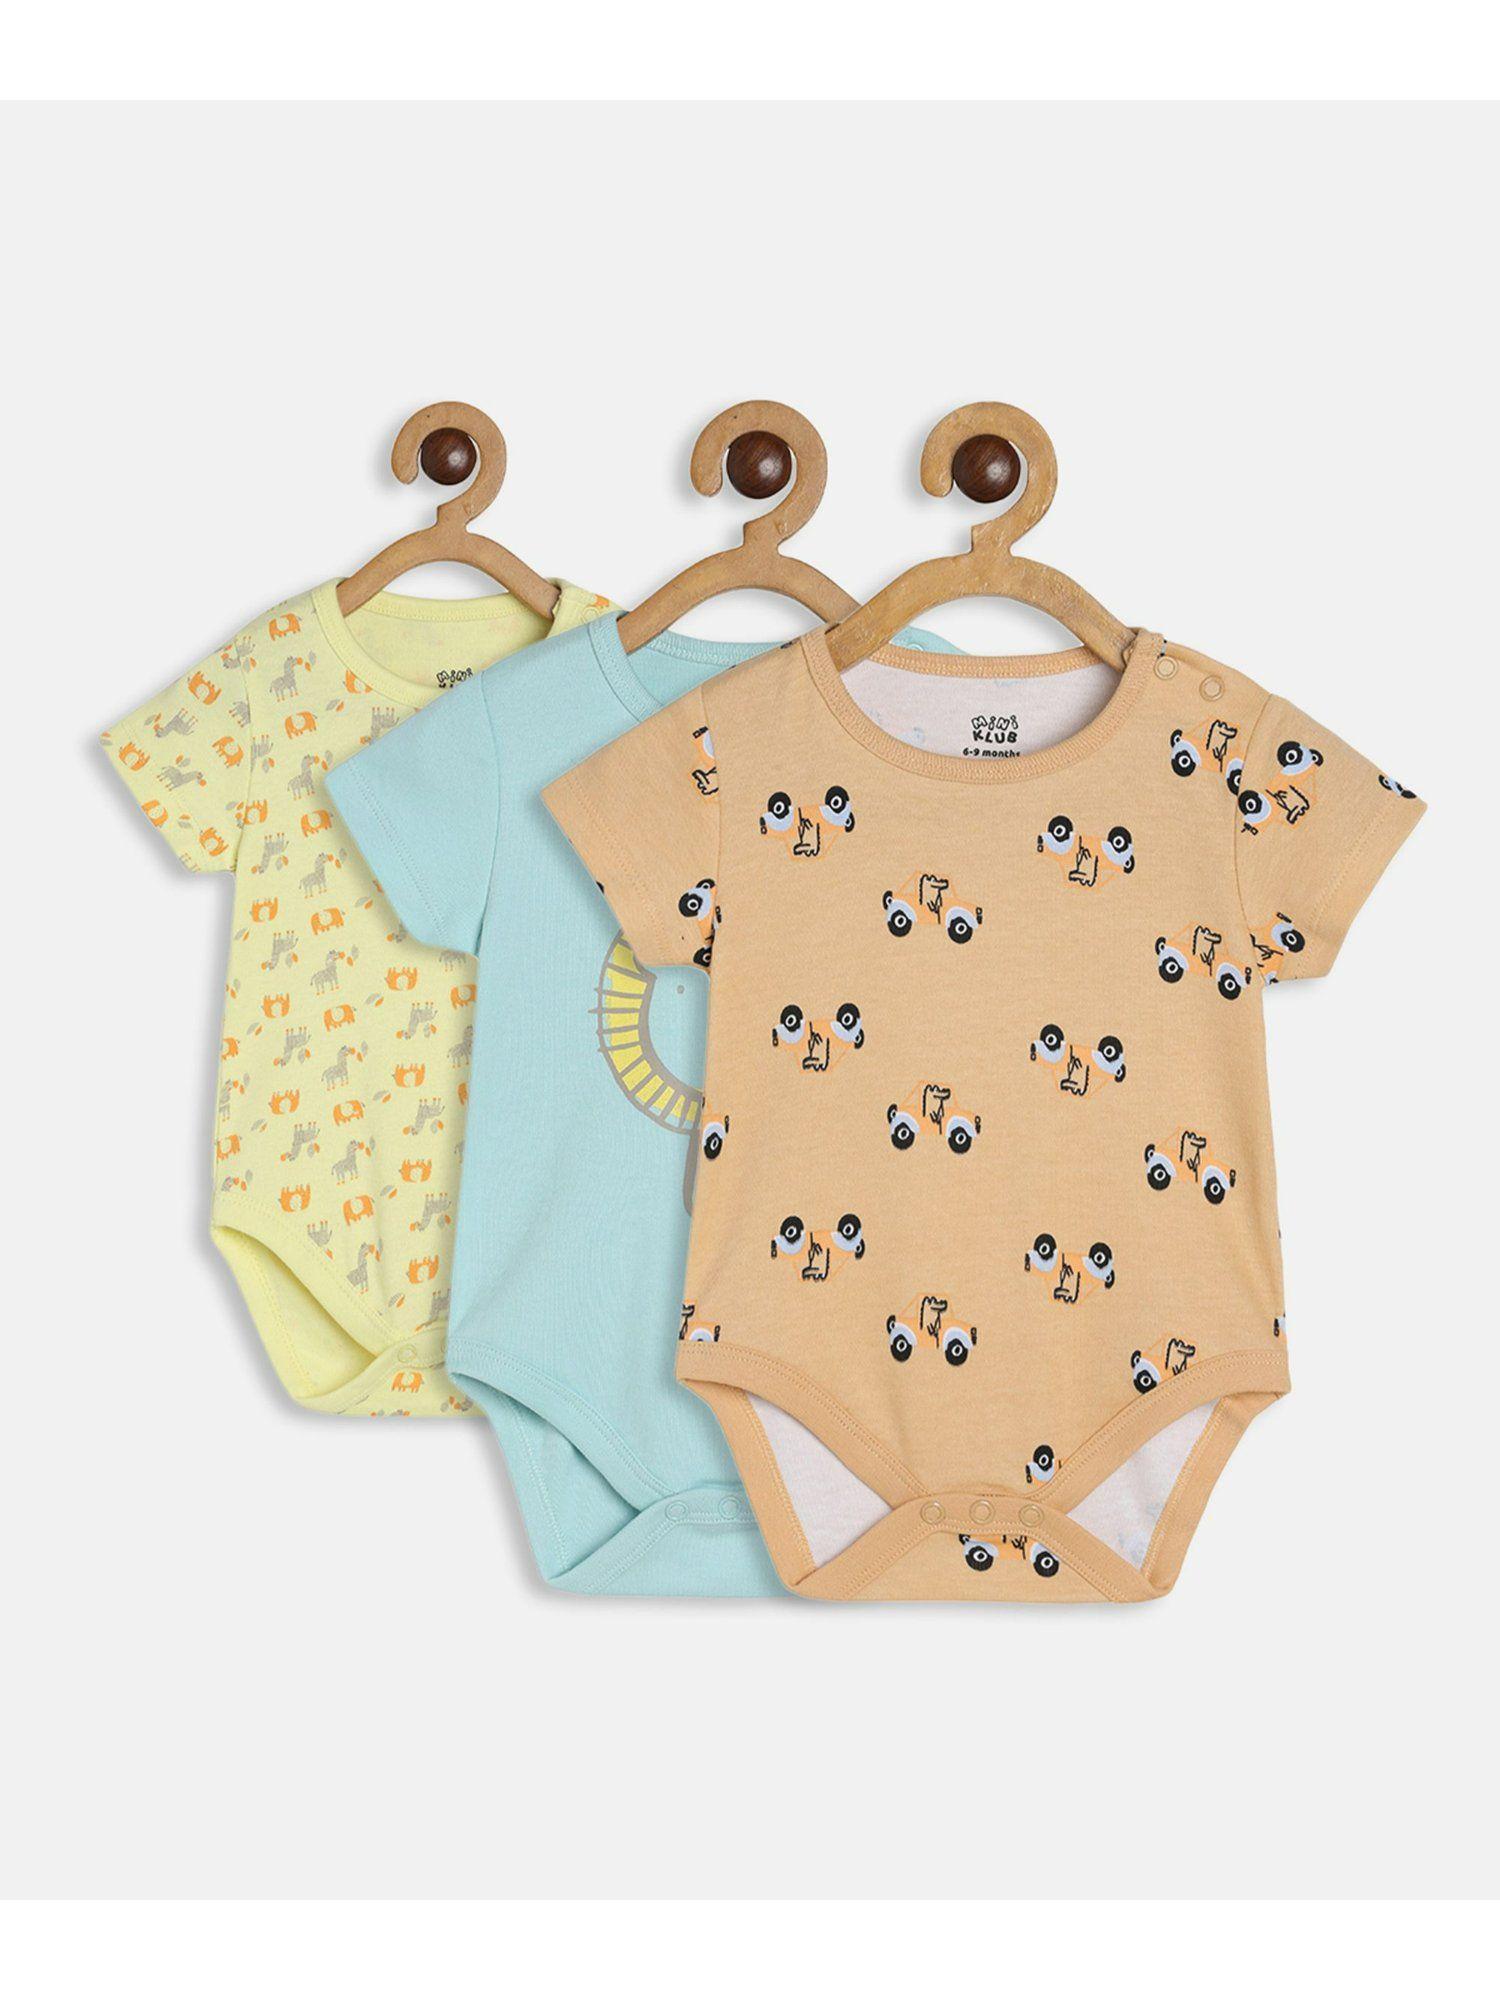 boys multi color bodysuits (pack of 3)